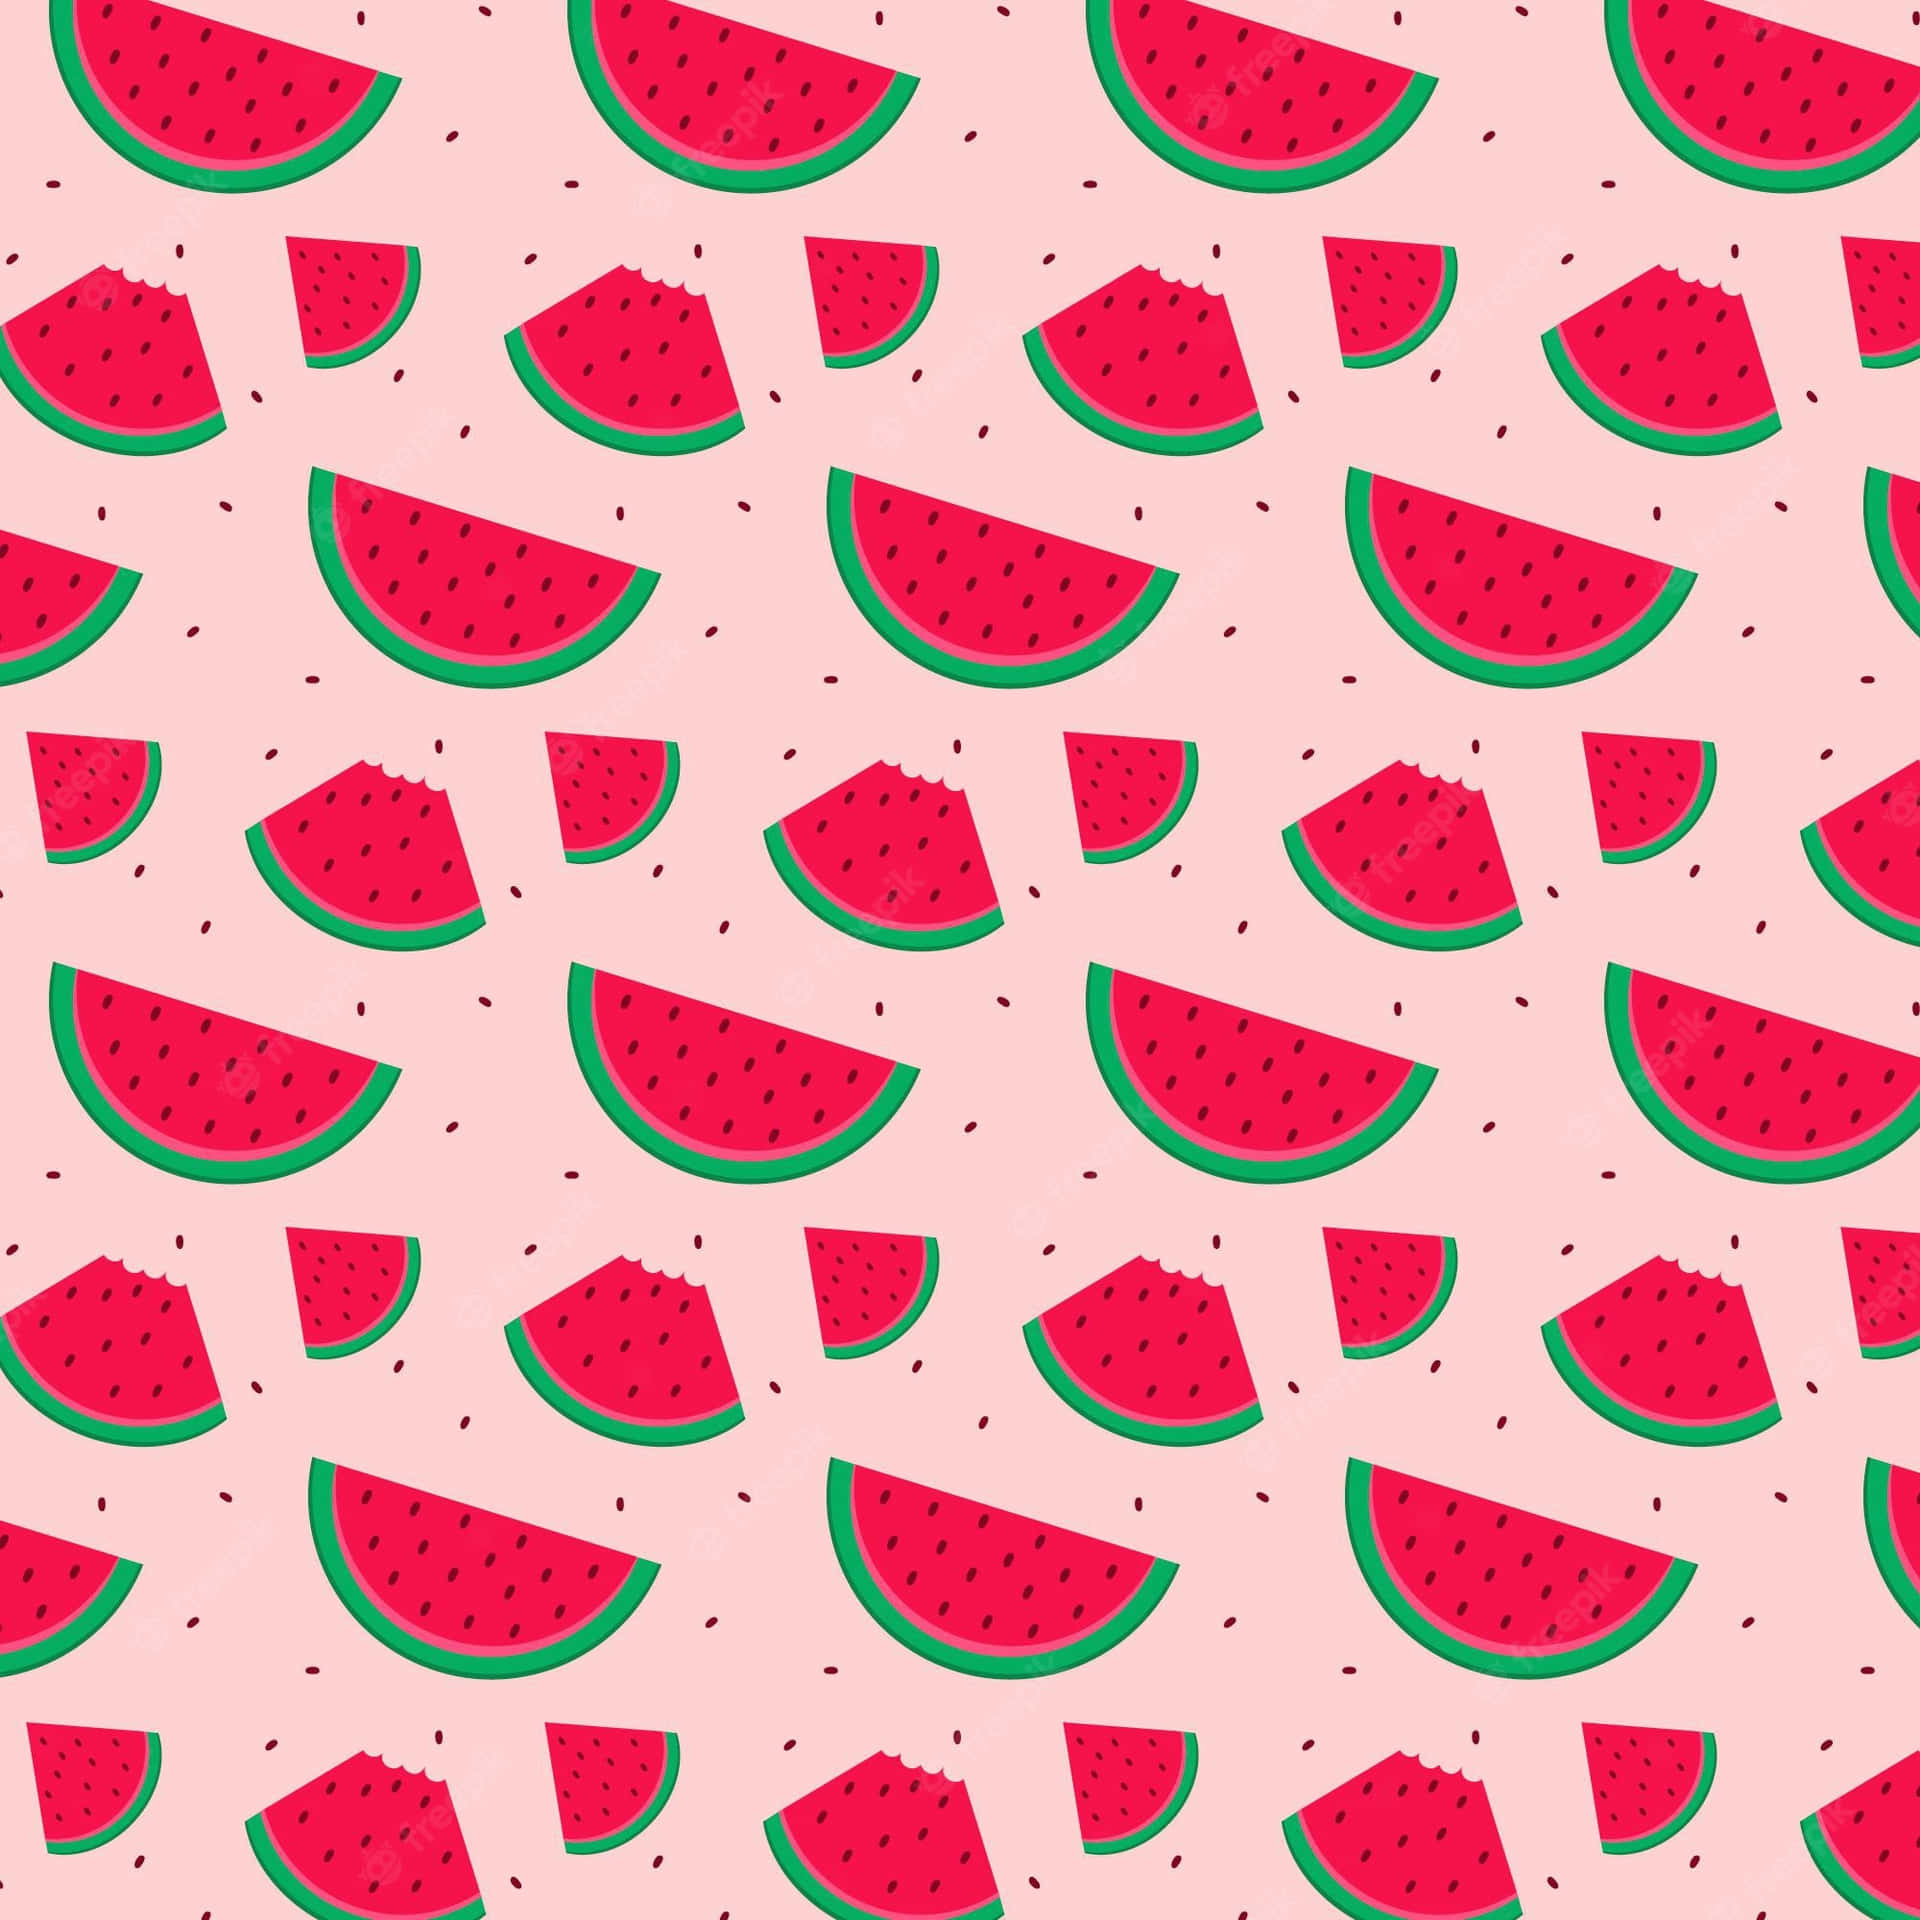 Lovely Big And Small Sliced Watermelons Background